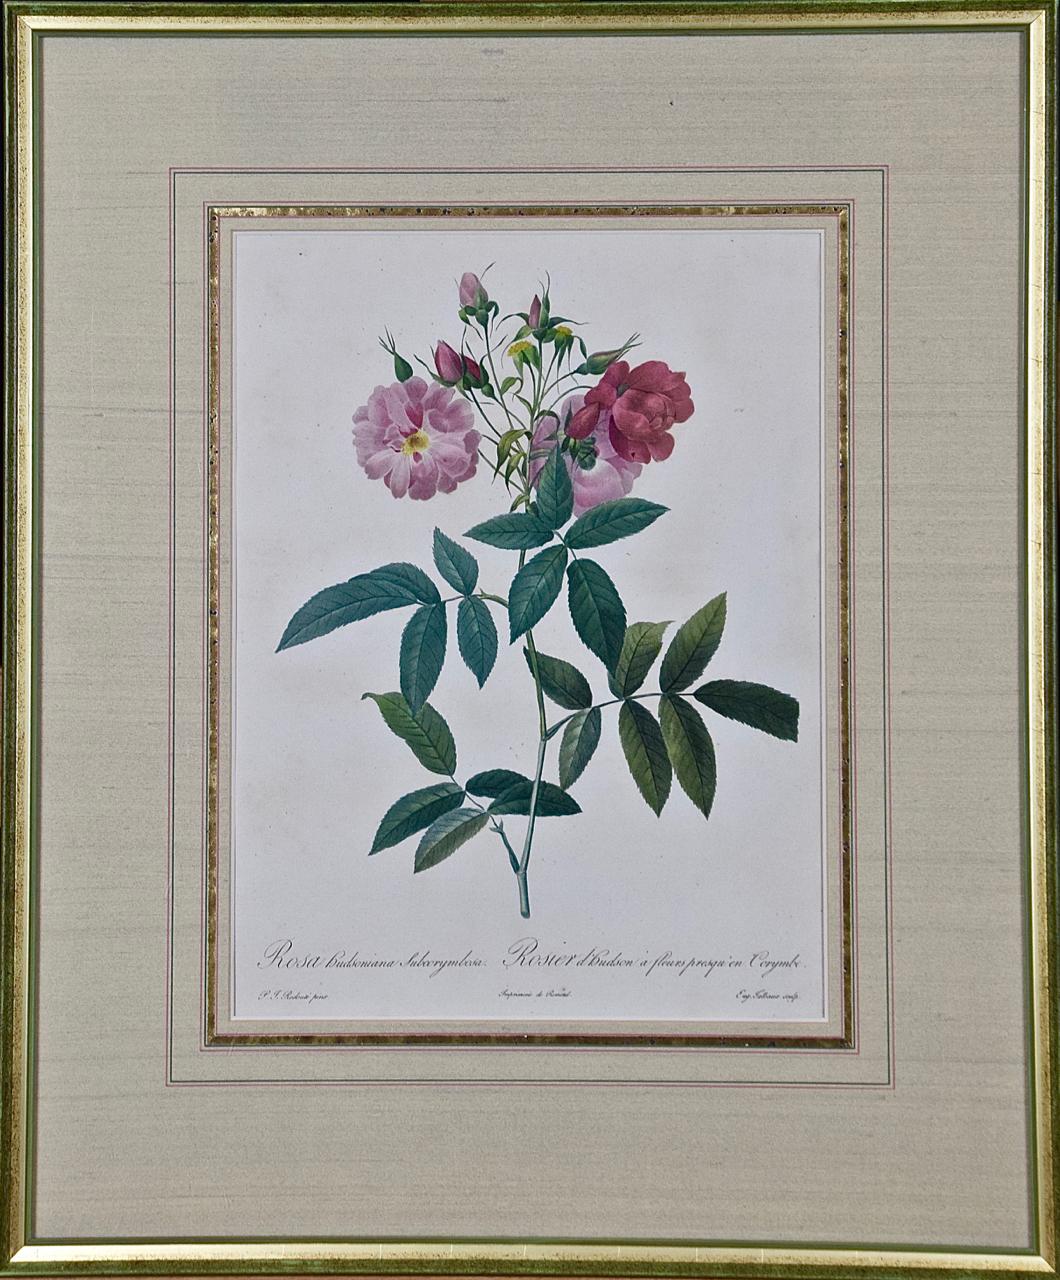 Pierre-Joseph Redouté Still-Life Print - Redoute Hand Colored Engraving "Rosa Budsoniana" from Les Roses